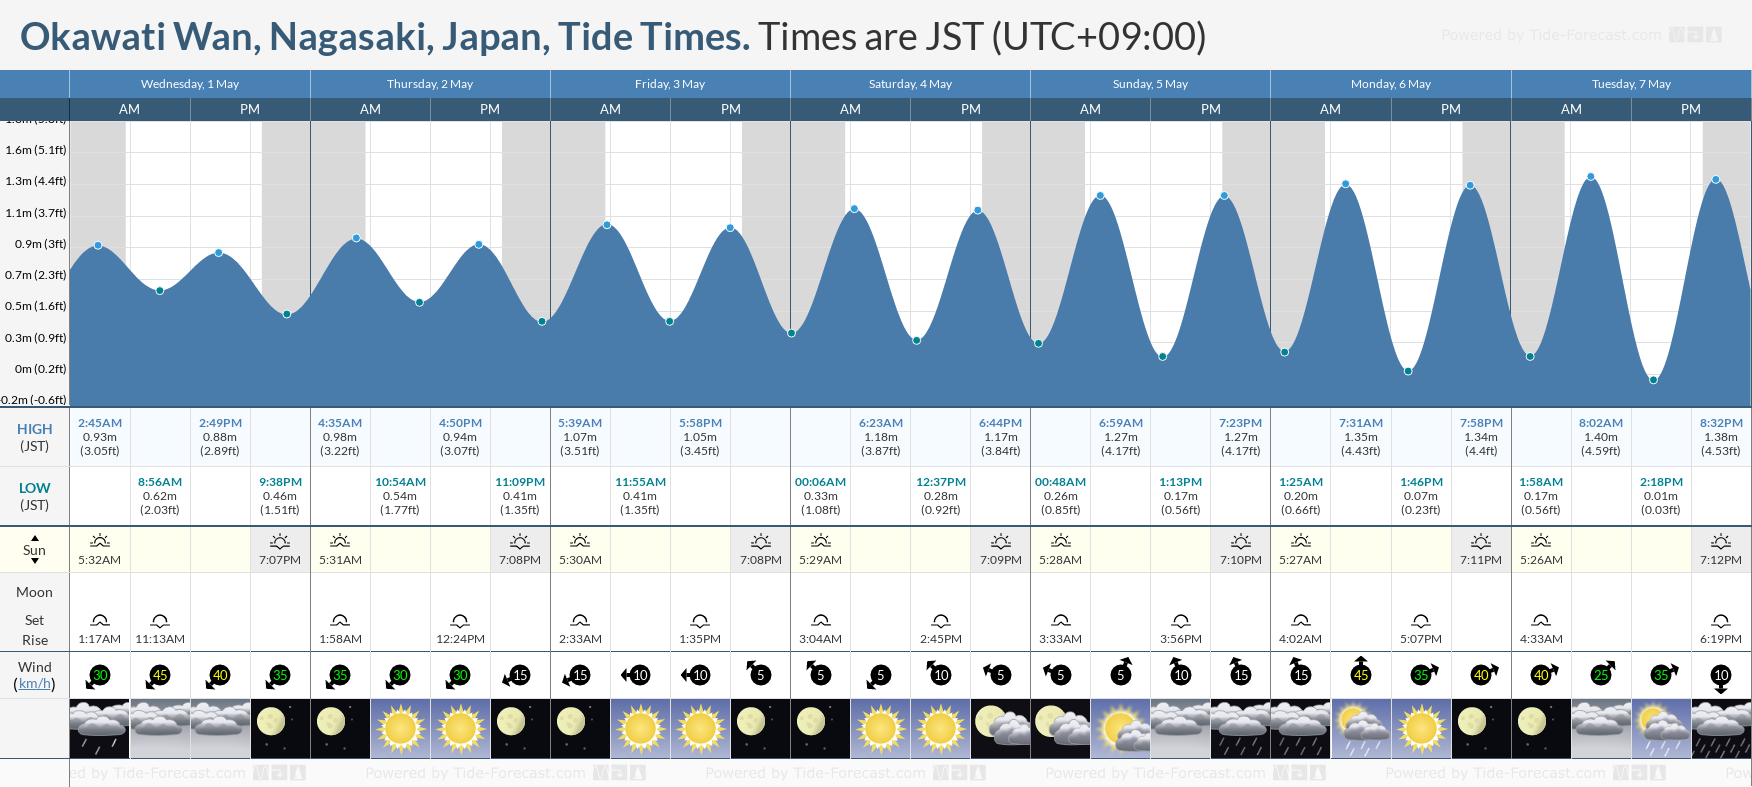 Okawati Wan, Nagasaki, Japan Tide Chart including high and low tide times for the next 7 days